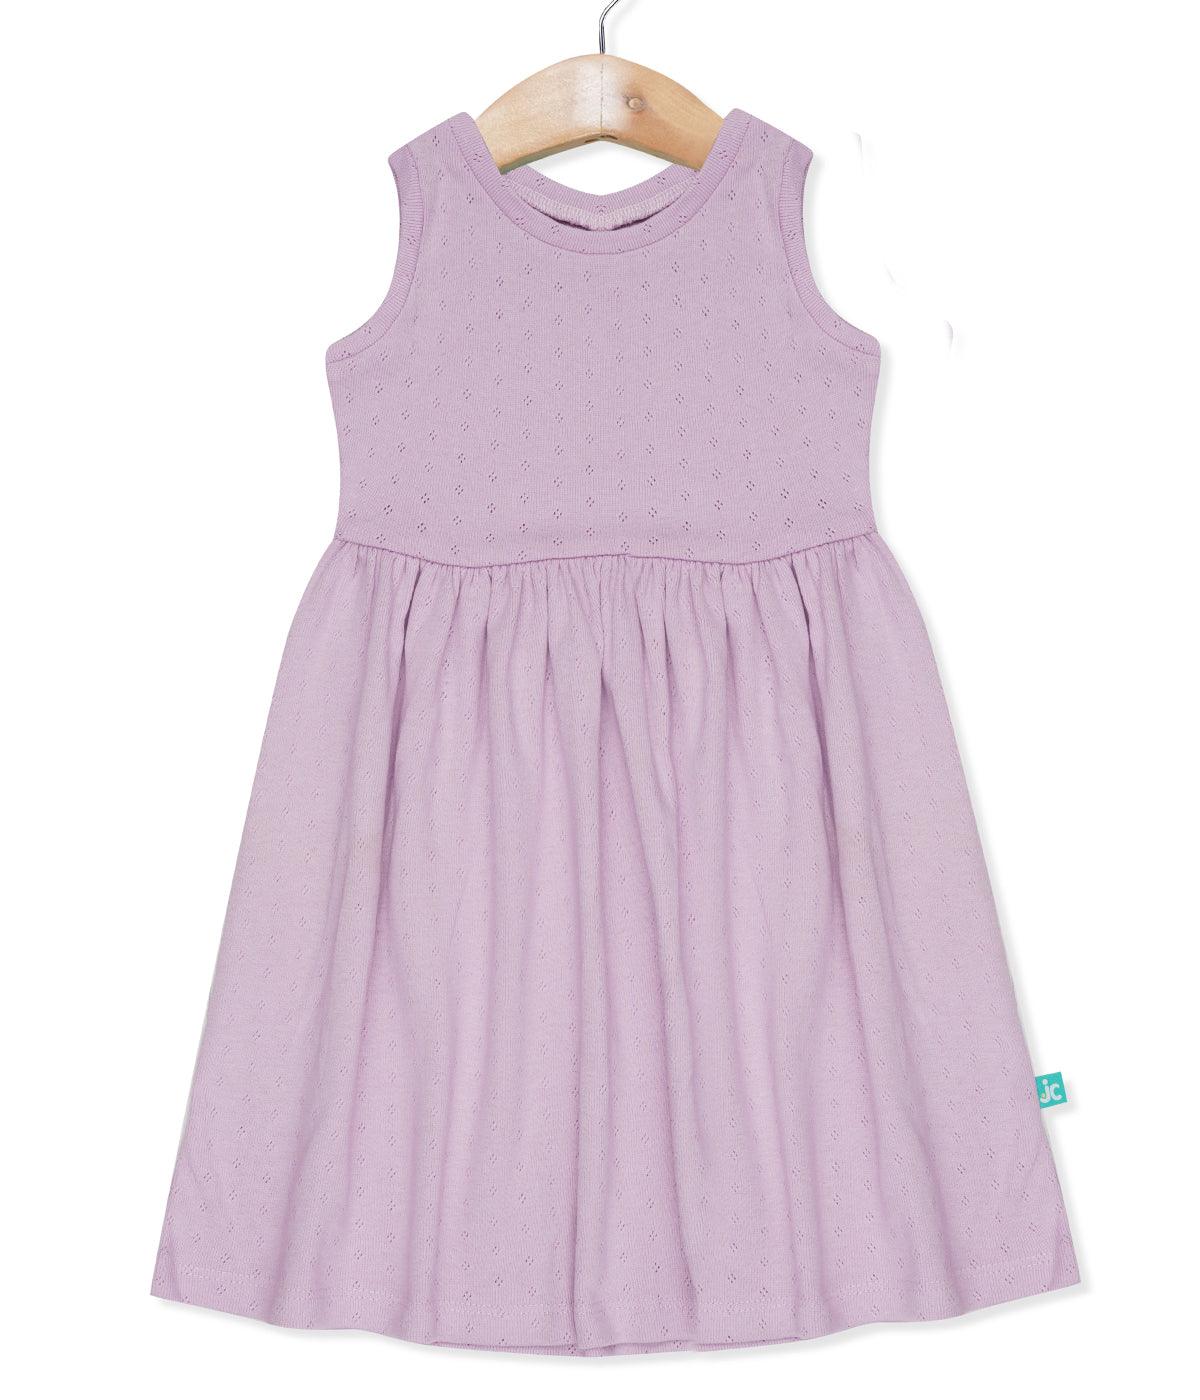 Baby Girls Pointel Fabric Casual Dress - Lavender - Juscubs